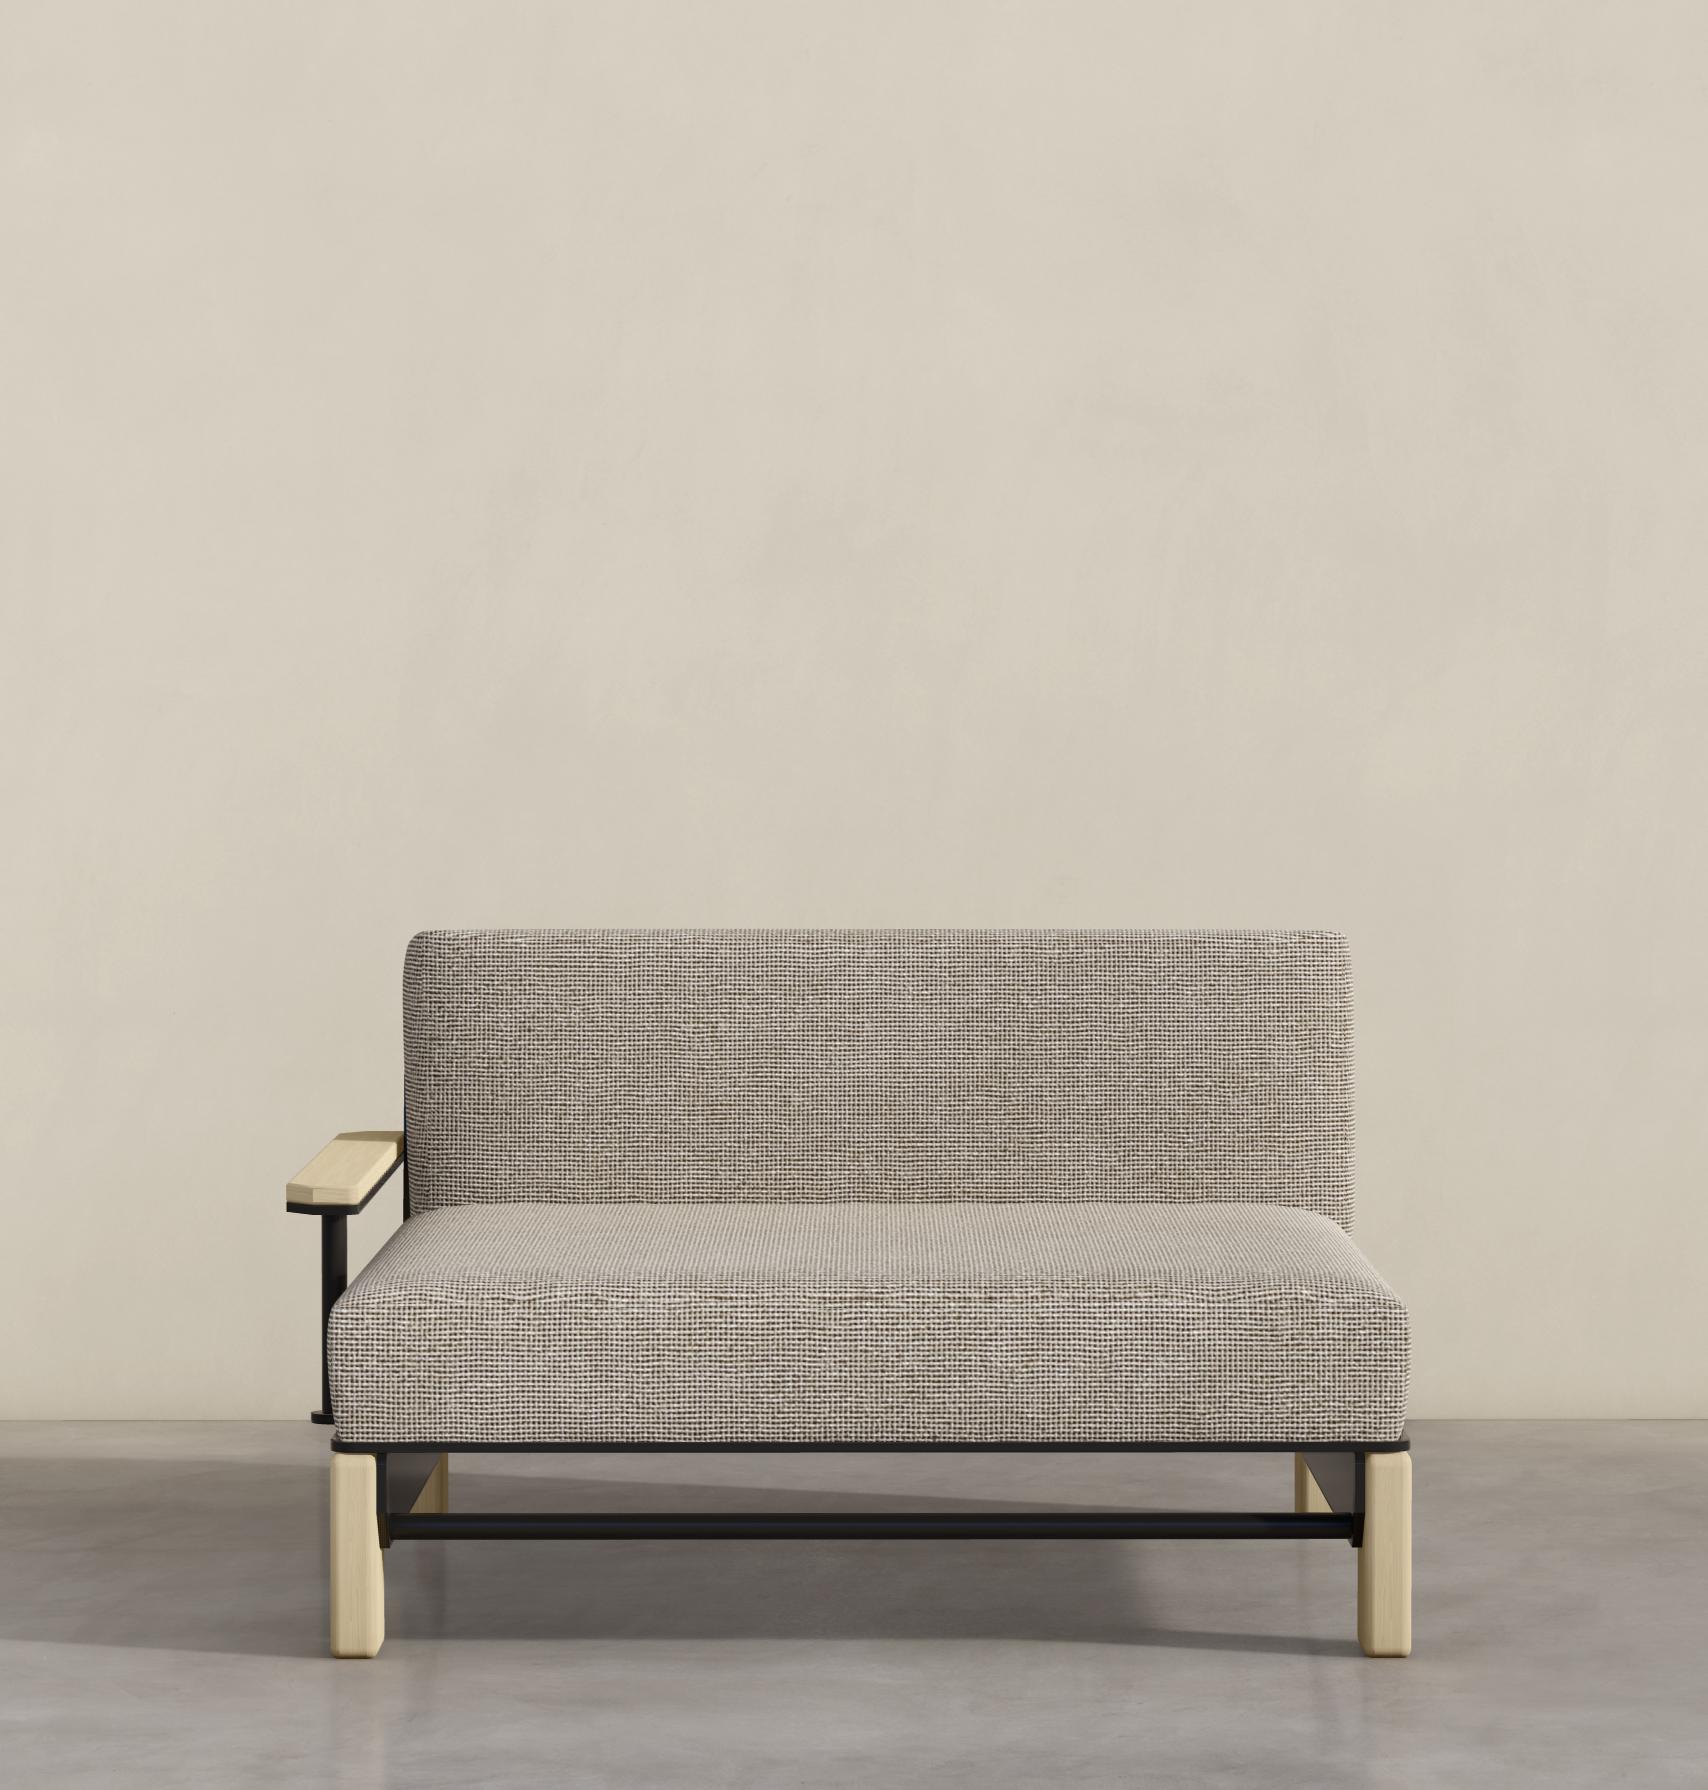 The 0:1 outdoor collection by Studio:Rah, is a culmination of durable materials and refined connections between wood, metal, and upholstery. Each piece of the collection is made with solid anodized aluminum framing, high grade exterior timbers, and